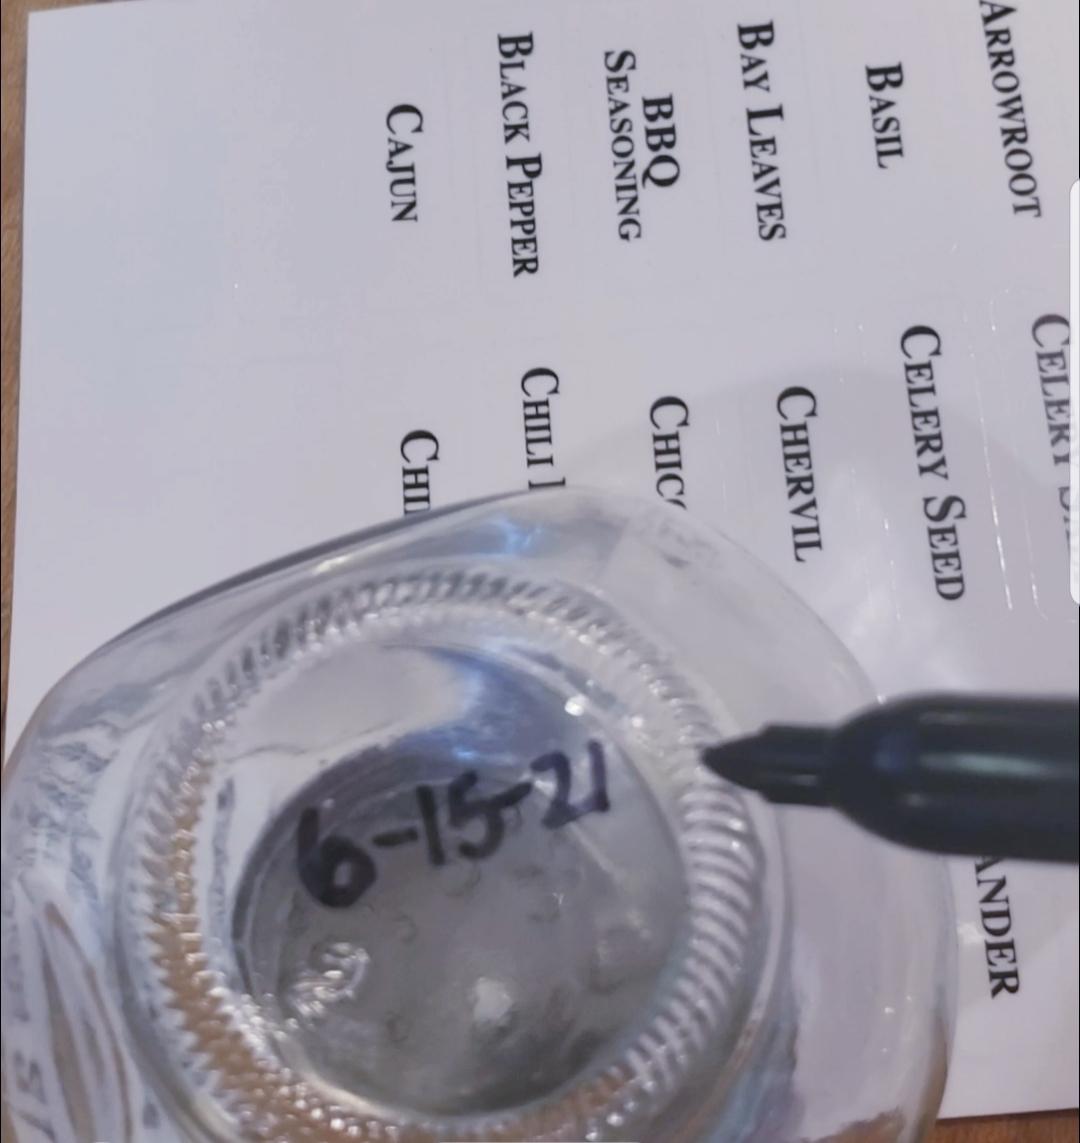 writing of expiration date of spices on bottom of jar